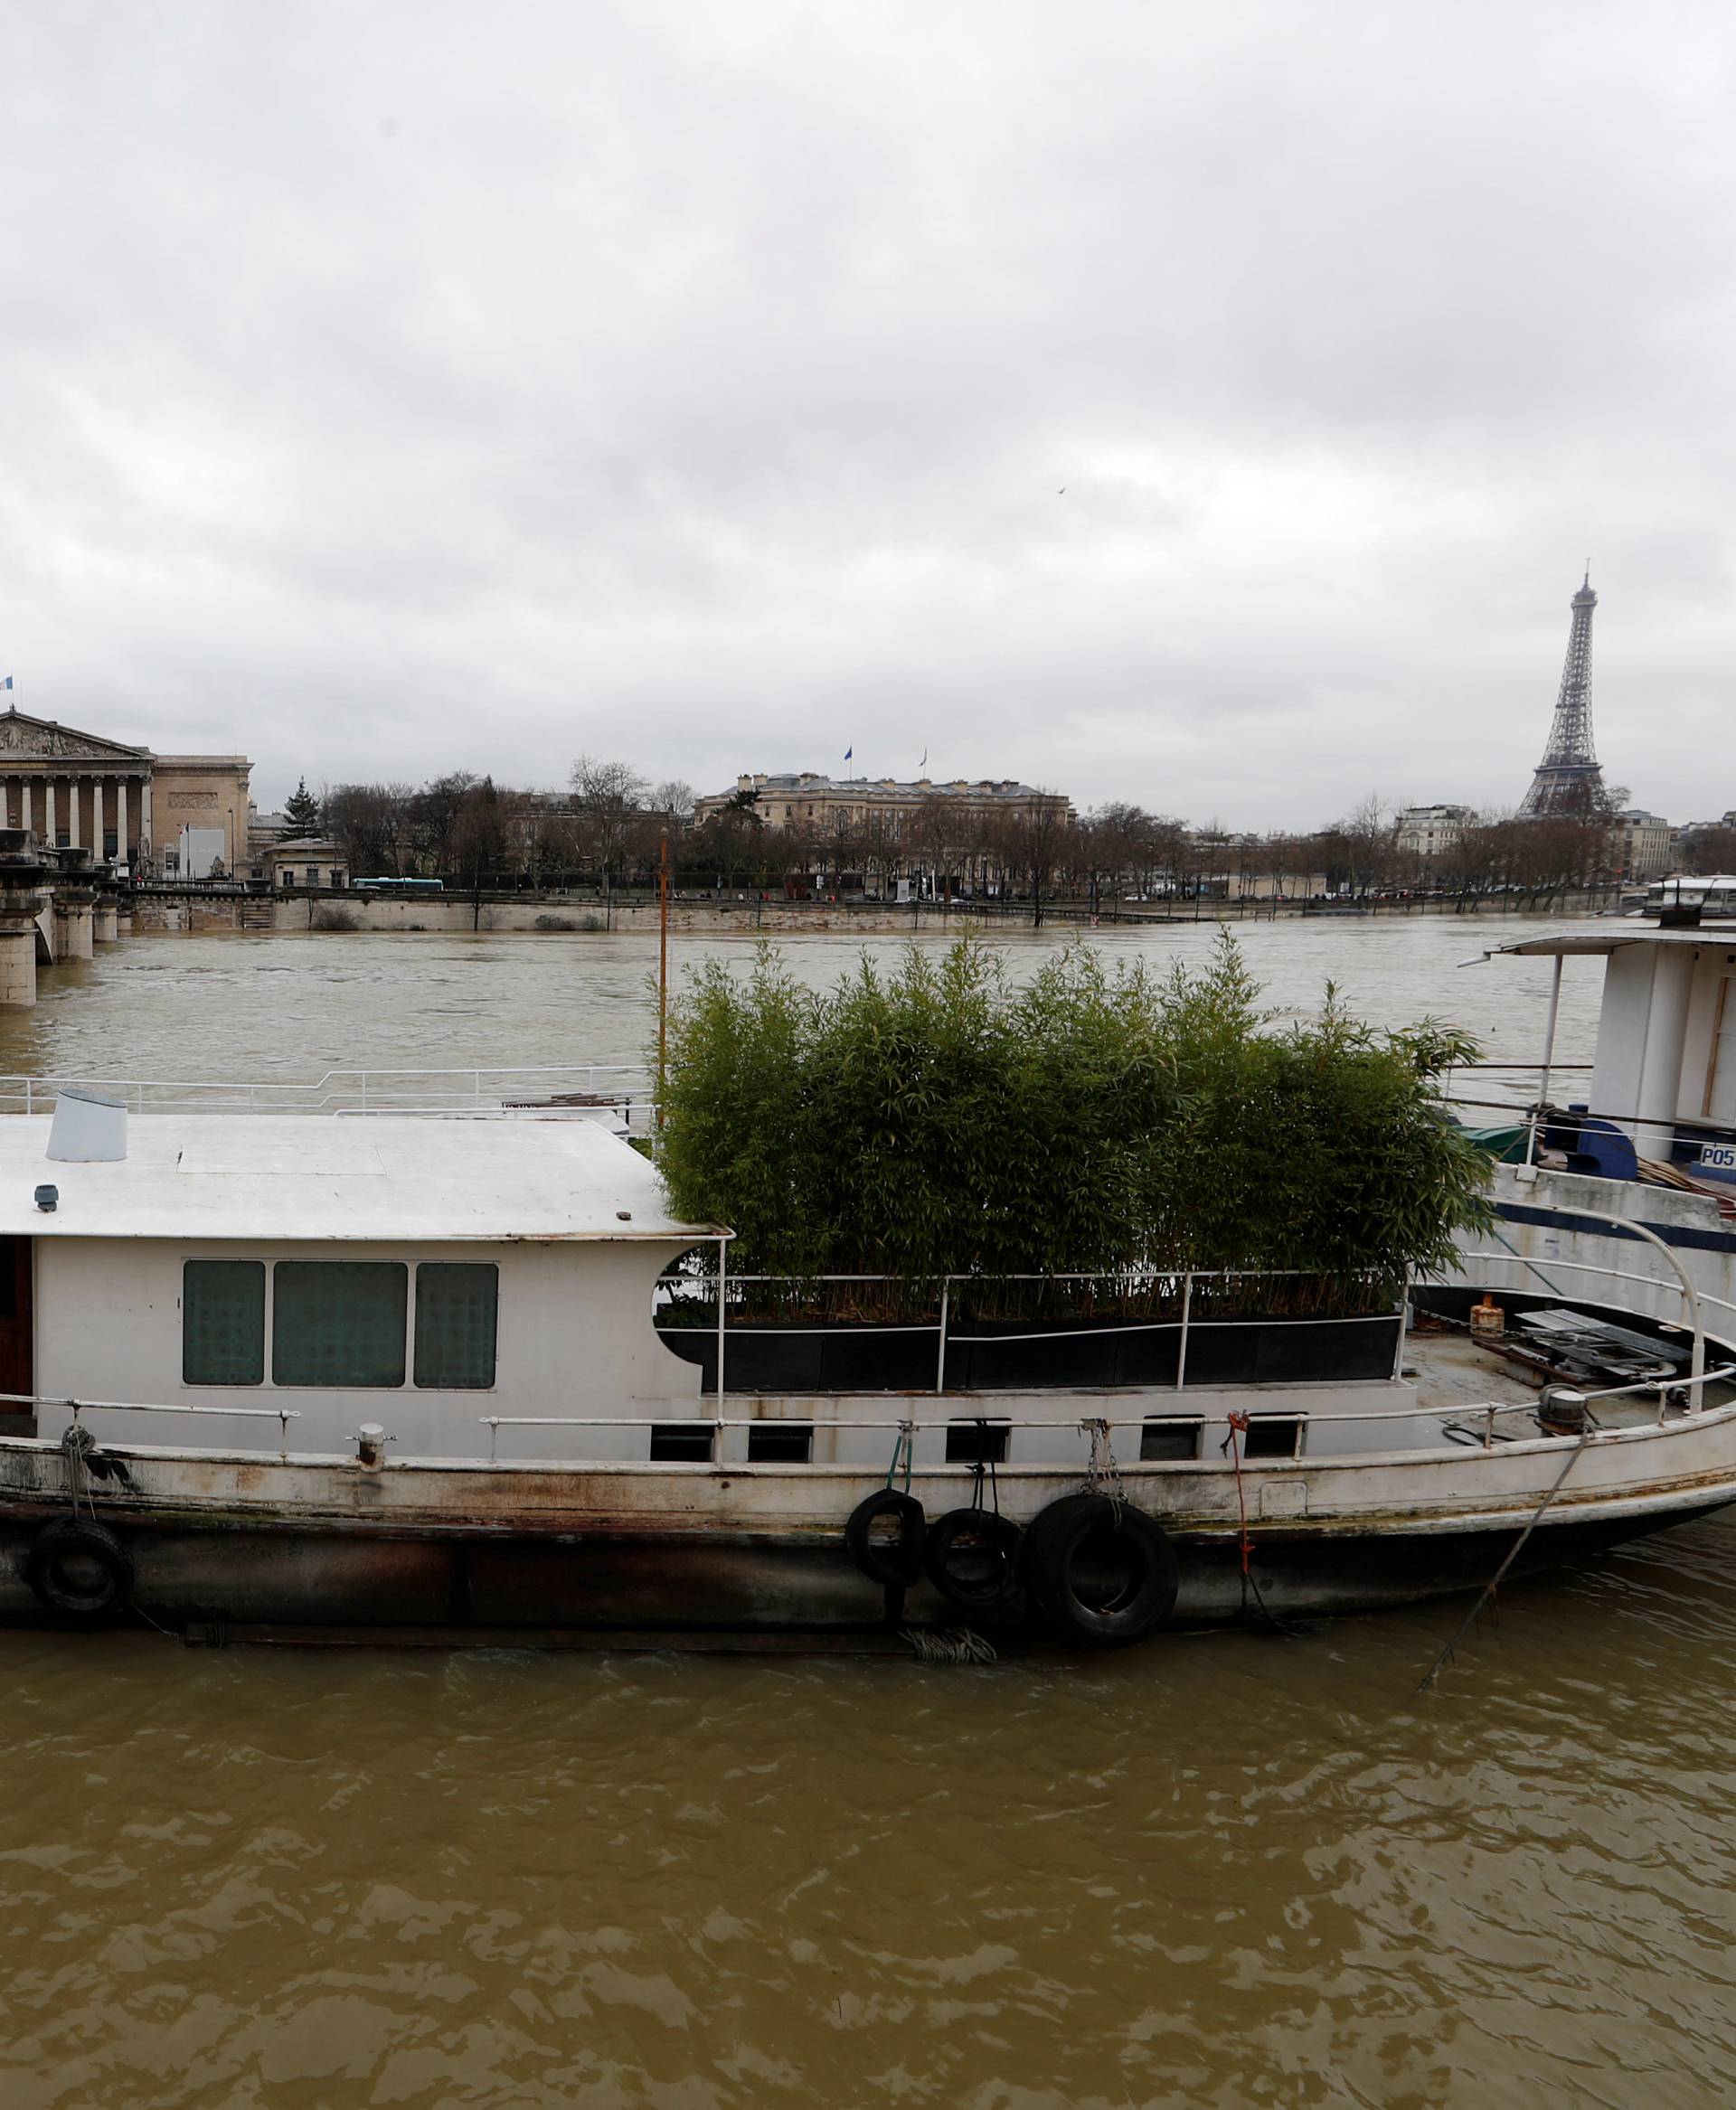 A view shows a peniche boat that is moored along the flooded banks of the River Seine after days of almost non-stop rain caused flooding in the country in Paris